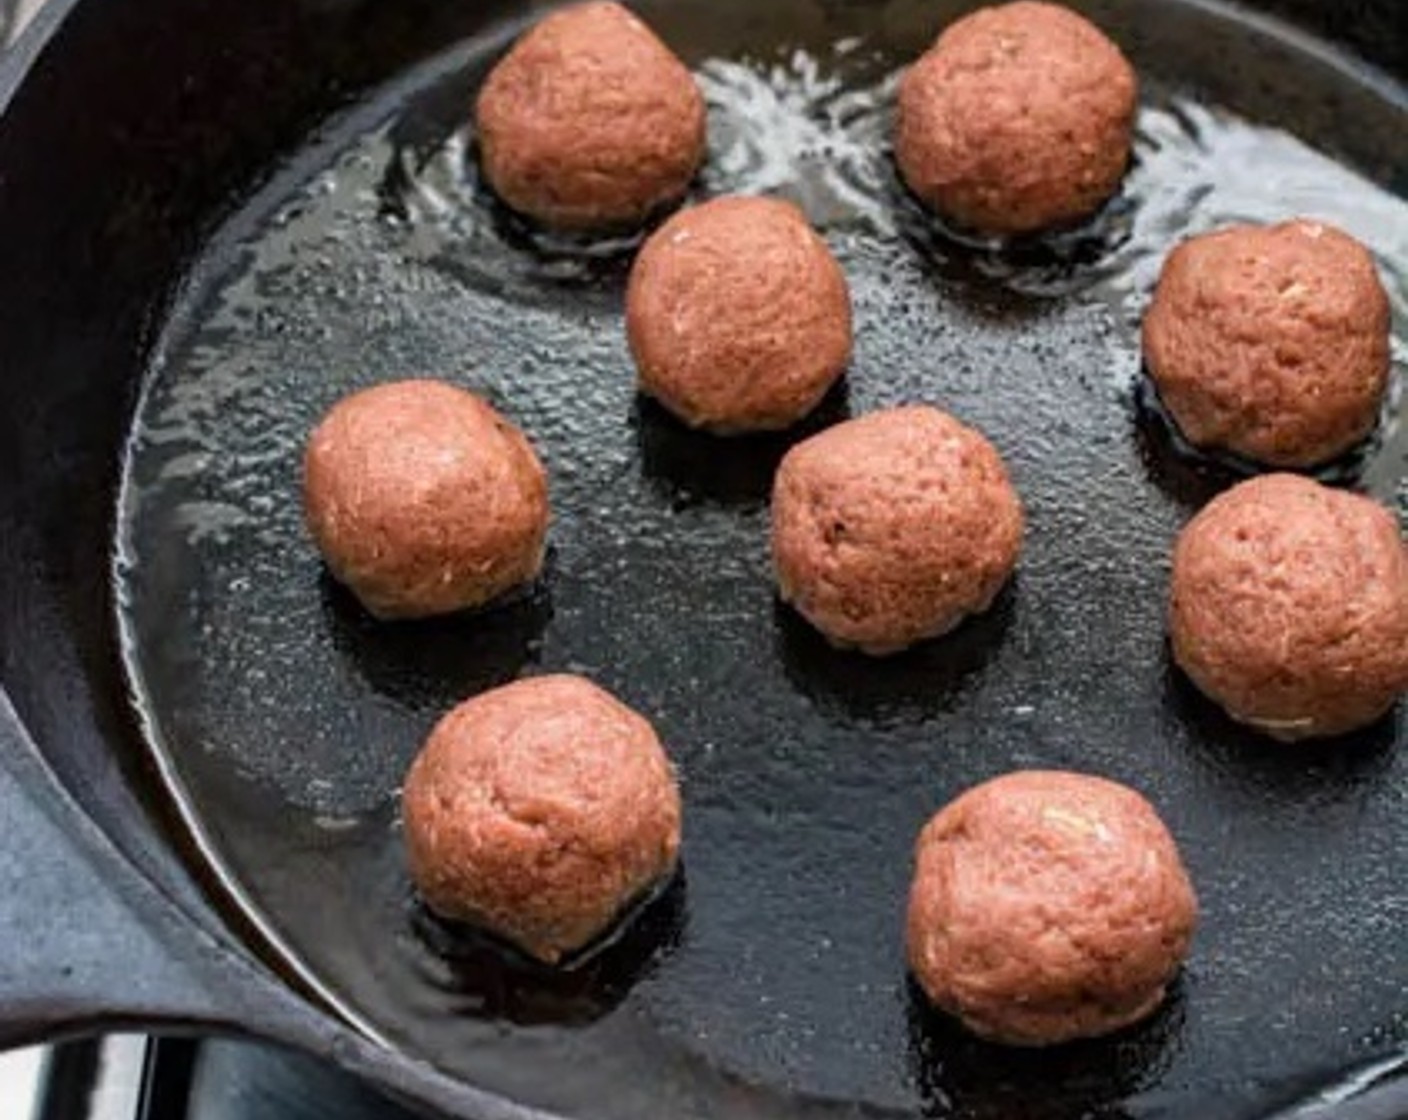 step 5 Carefully place the meatballs in the skillet, leaving adequate space between each meatball. Add 8 to 10 meatballs to the skillet at a time. Leave meatballs untouched for about 2 minutes to allow the meatball to properly sear before turning them over.